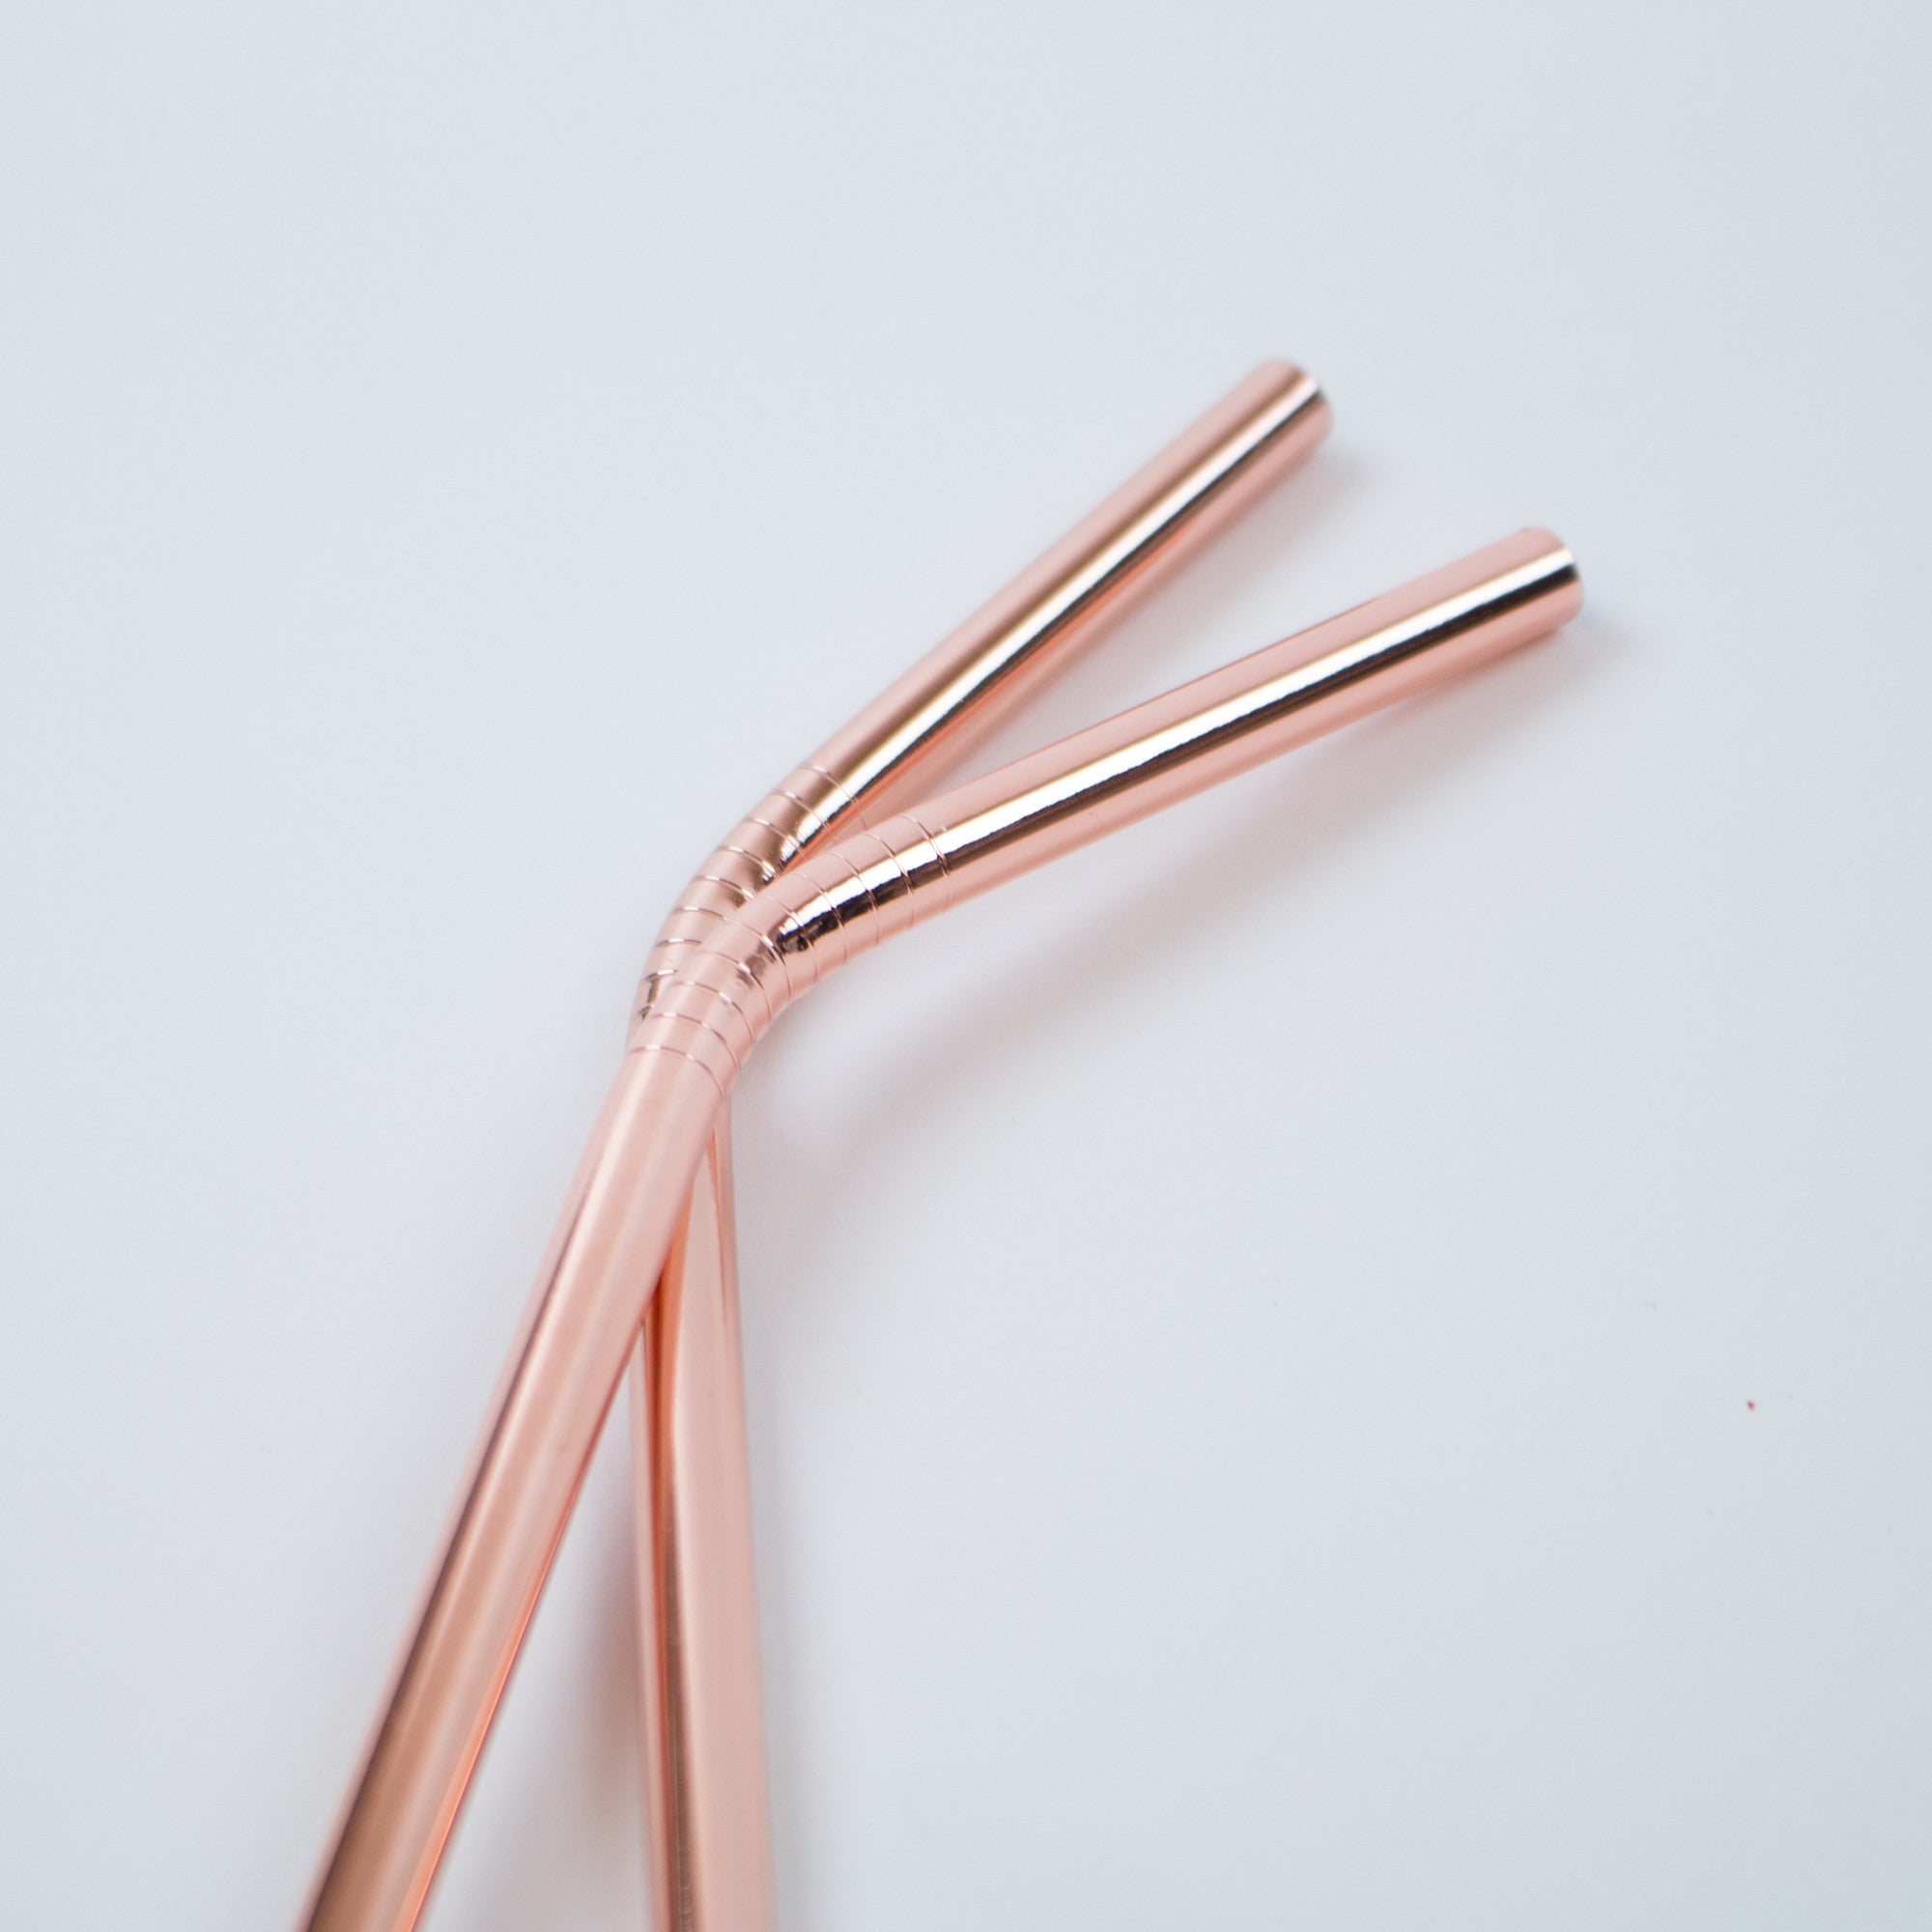 Copper Cocktail Straws (Set of 4) - The VinePair Store